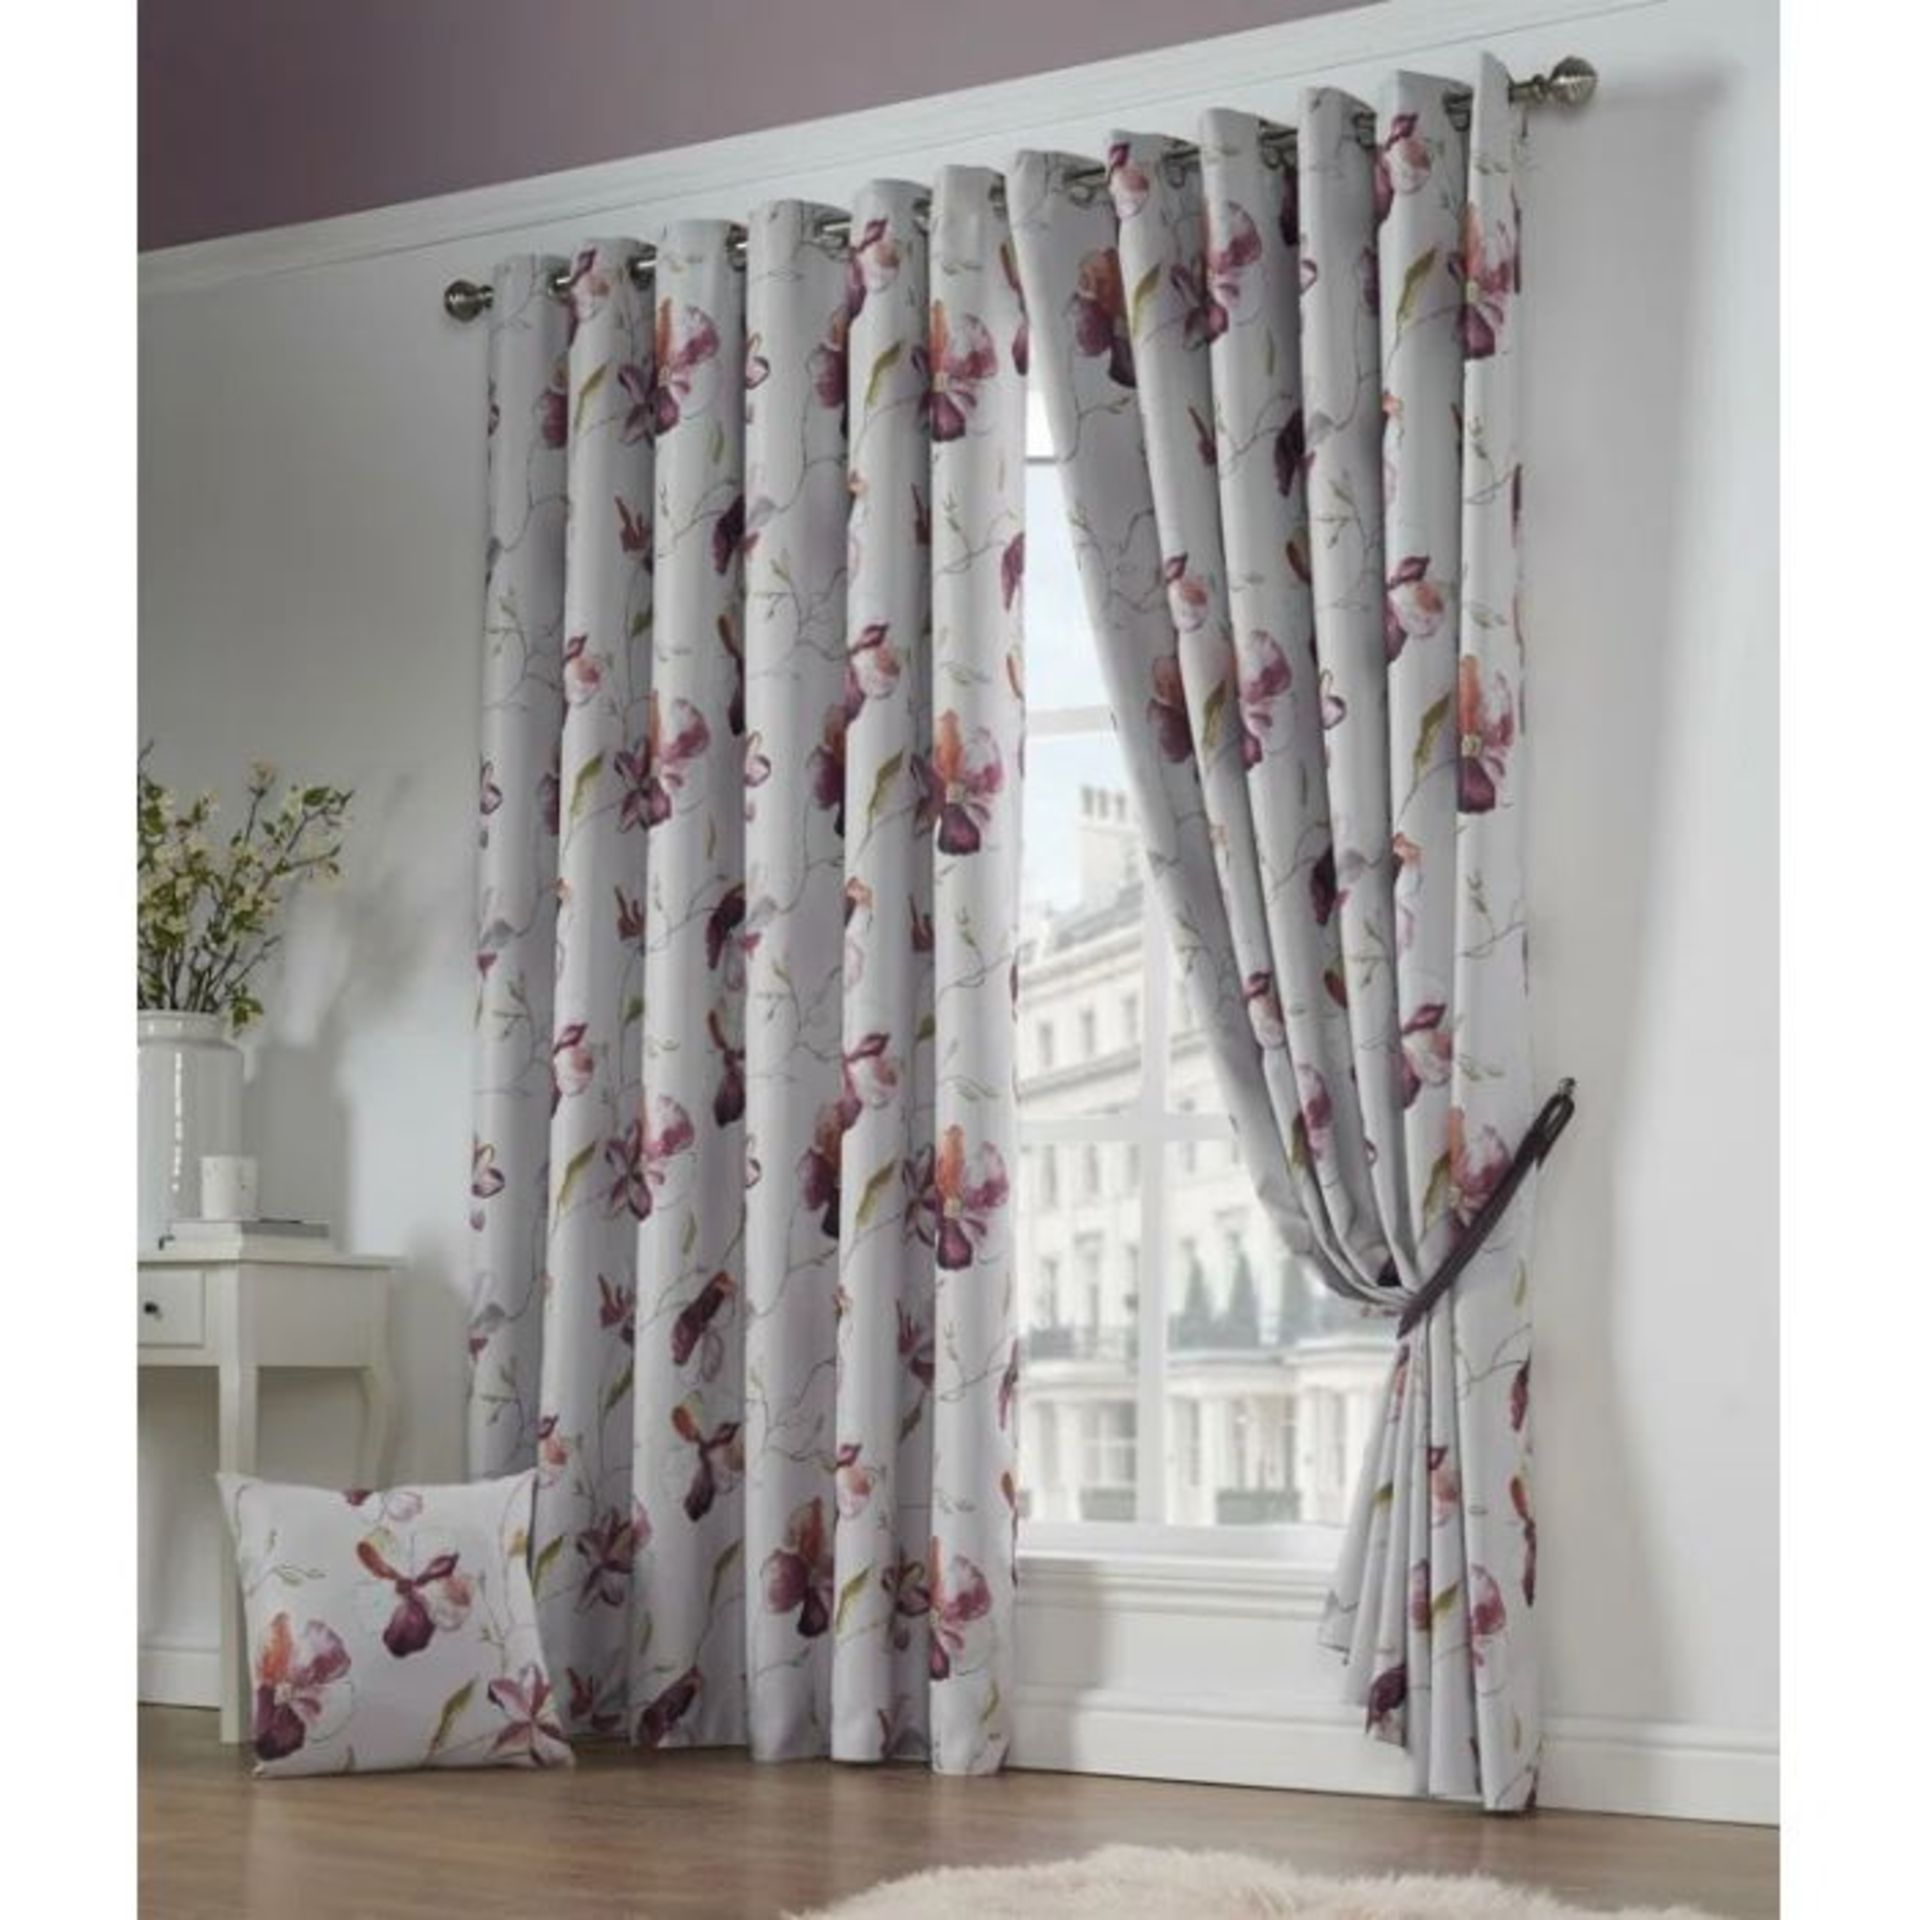 Ophelia & Co., Rodrigues Eyelet Blackout Curtains (WHITE & PINK FLORAL PATTERN) (229 W x 274 D cm) -